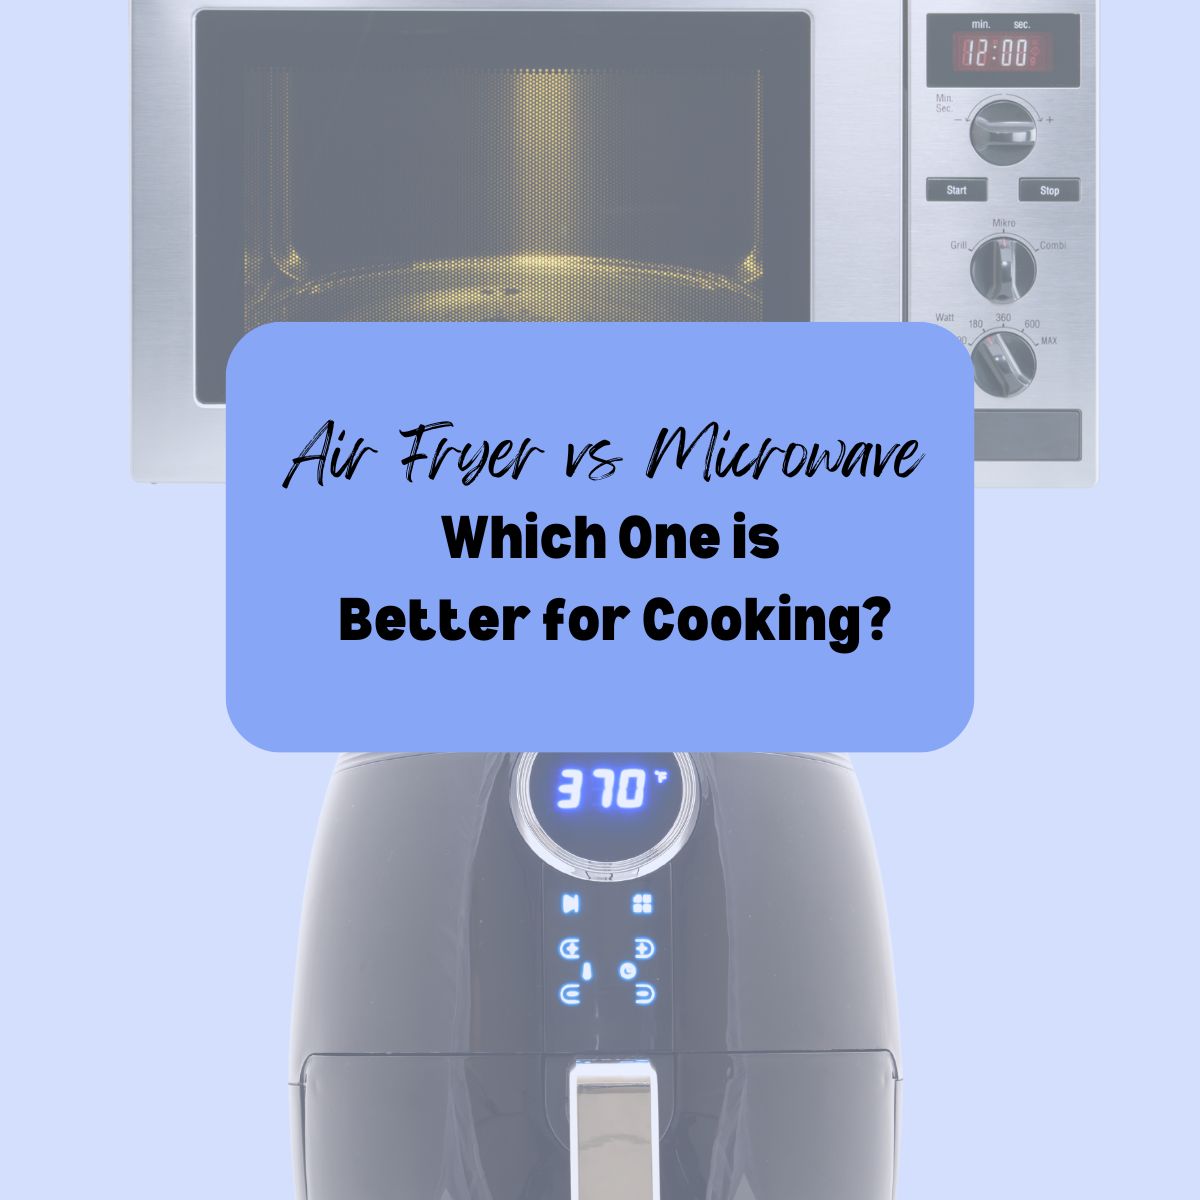 Text overlay over a microwave and air fryer image with a light blue background